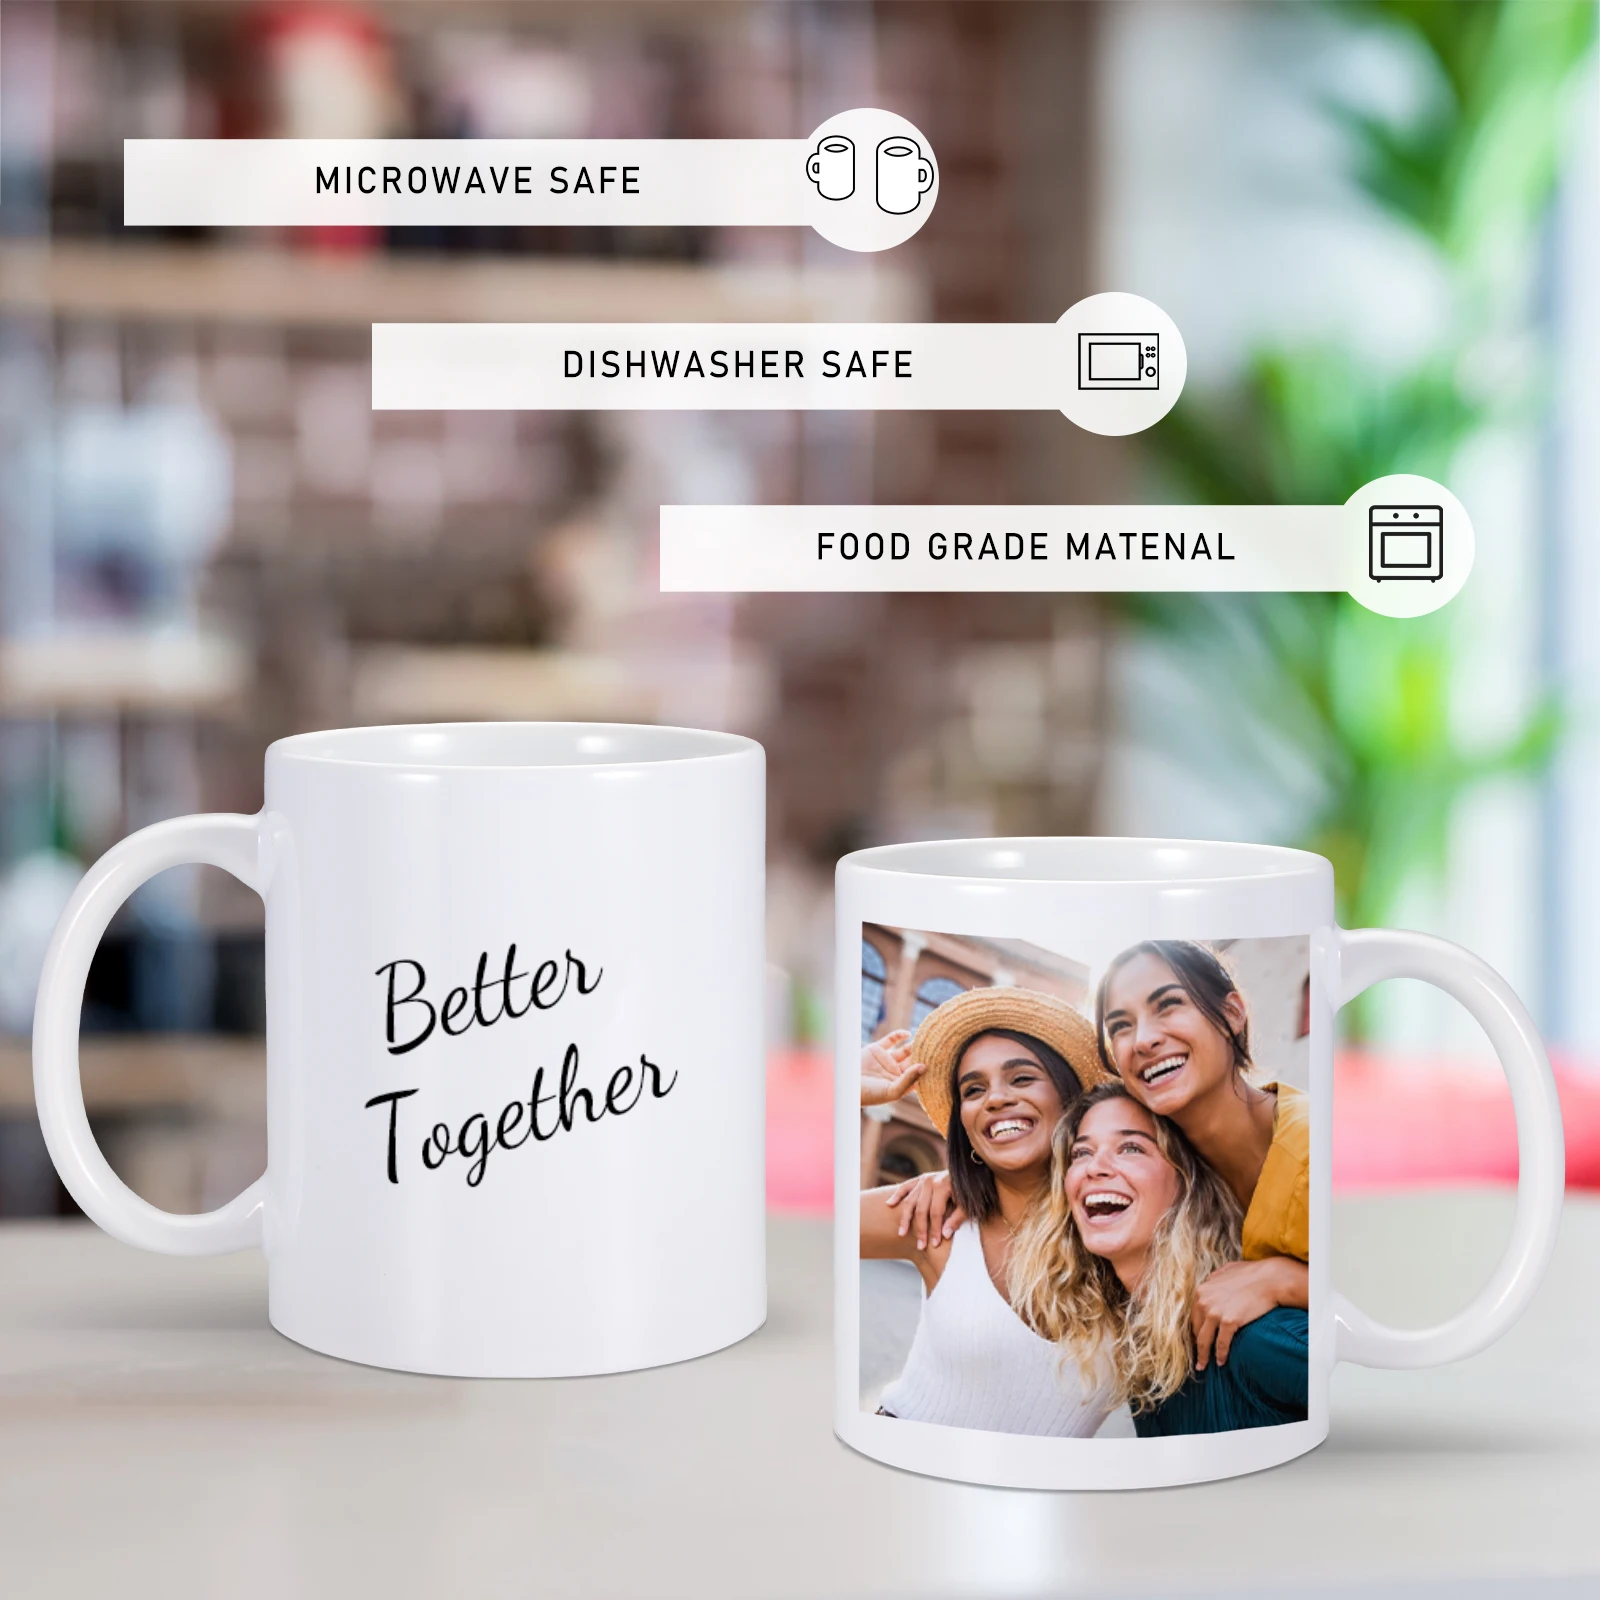 11OZ/330ML Customized Photo Text LOGO Mugs Exclusive Coffee Mug with Picture Ceramics Cups Milk Cup for Friends Couple Gifts